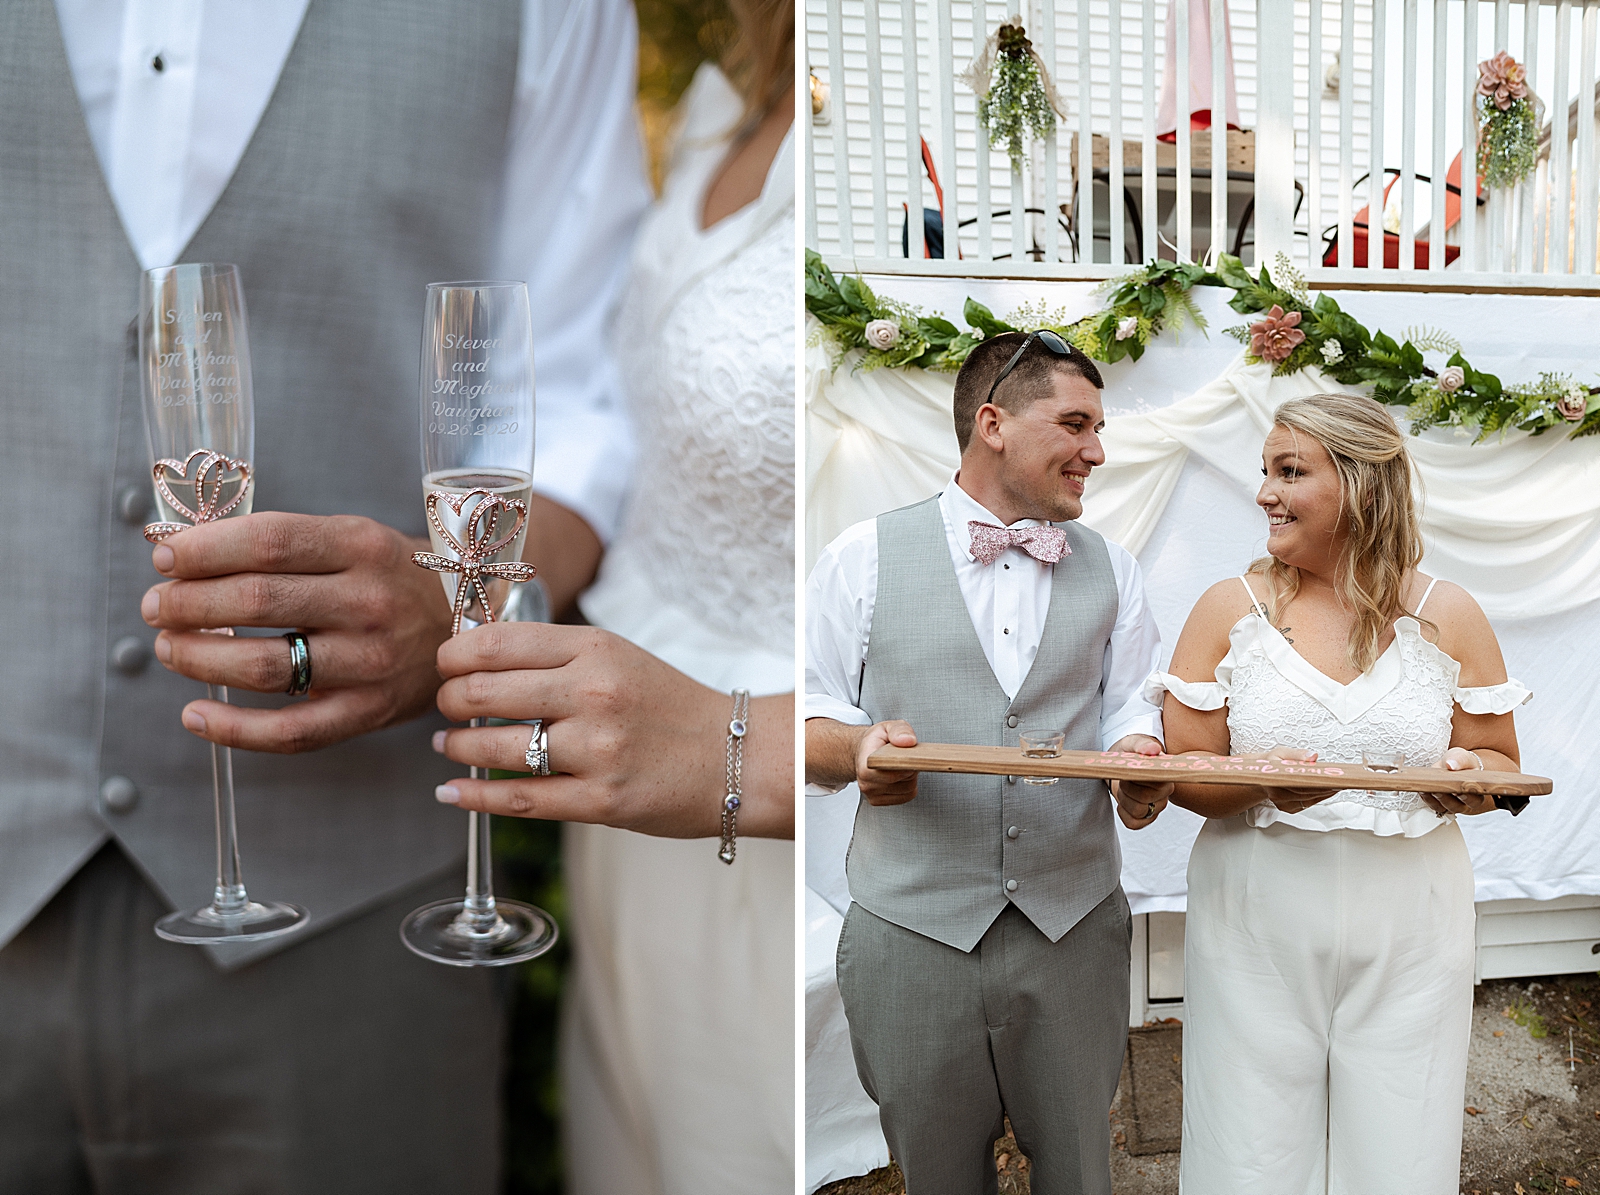 Closeup of Champaign glasses in Bride and Groom's hand